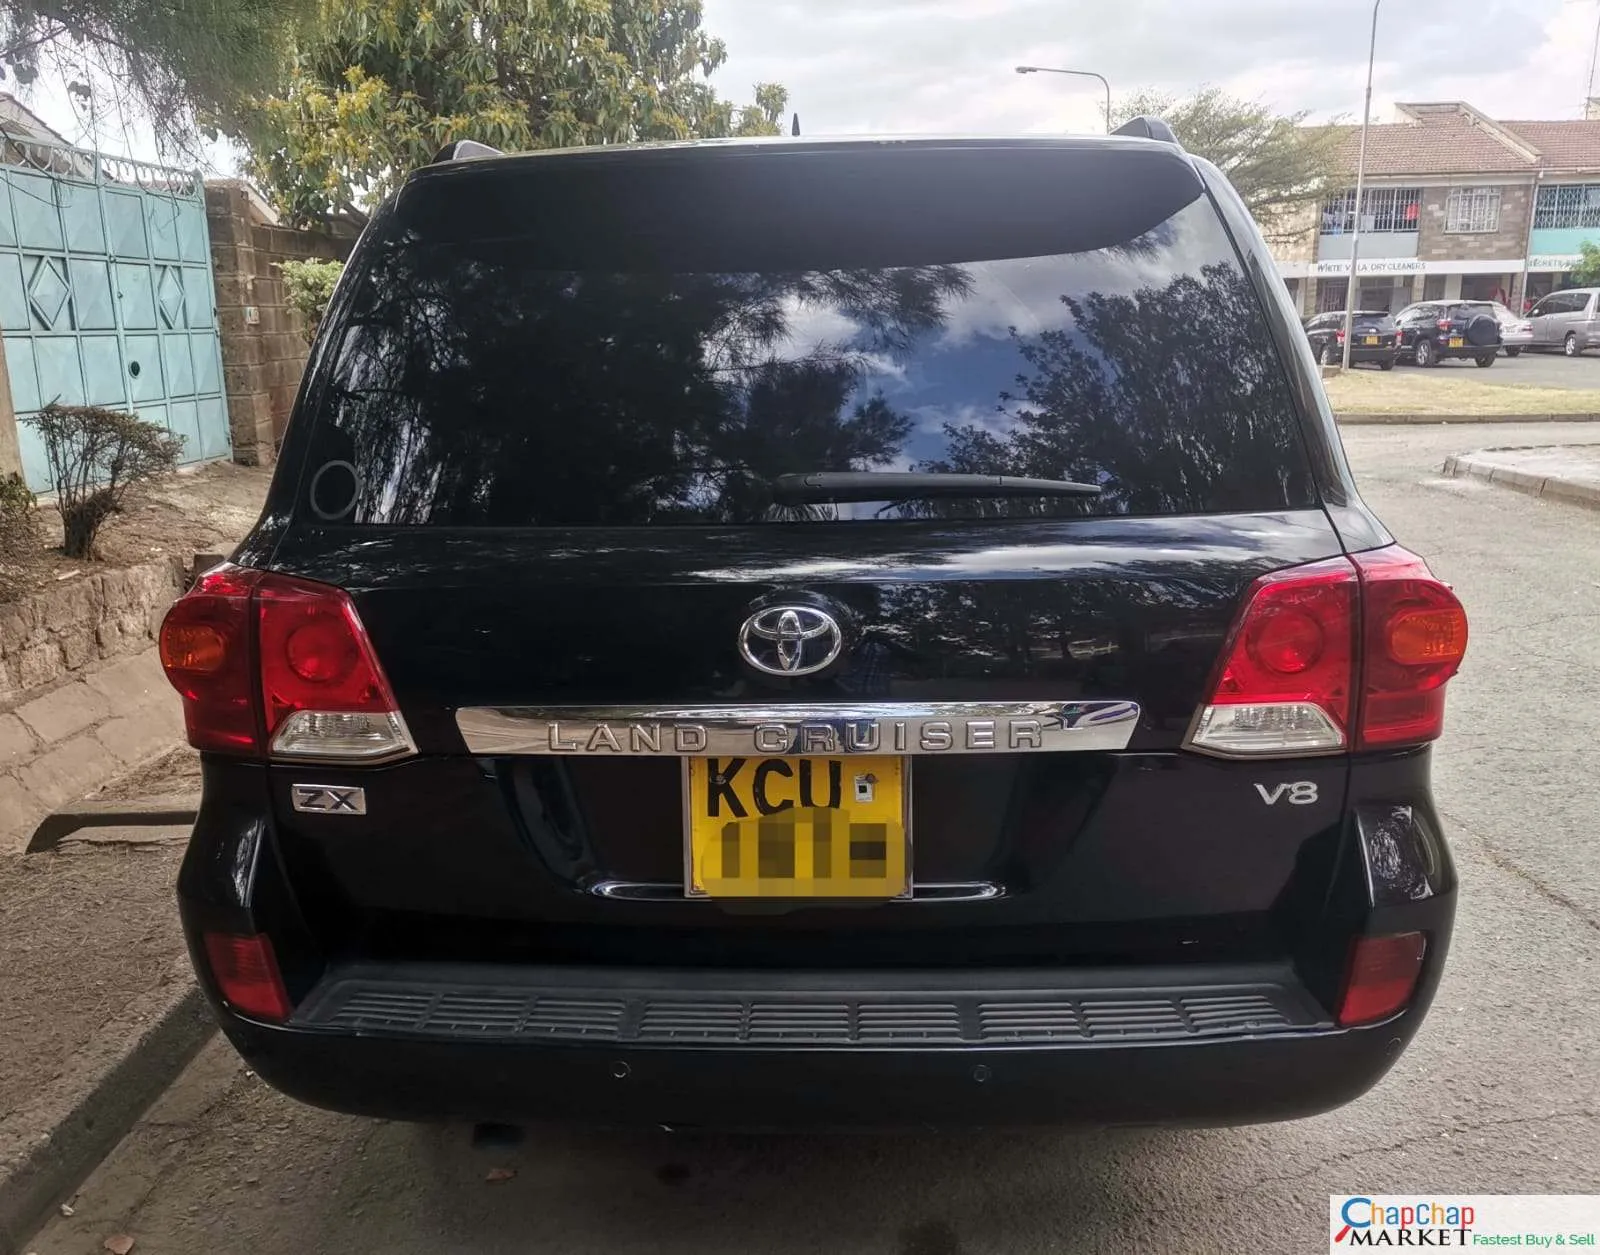 Toyota V8 ZX SUNROOF 200 series QUICKEST SALE You Pay 40% Deposit Trade in OK v8 zx for sale in kenya hire purchase installments EXCLUSIVE